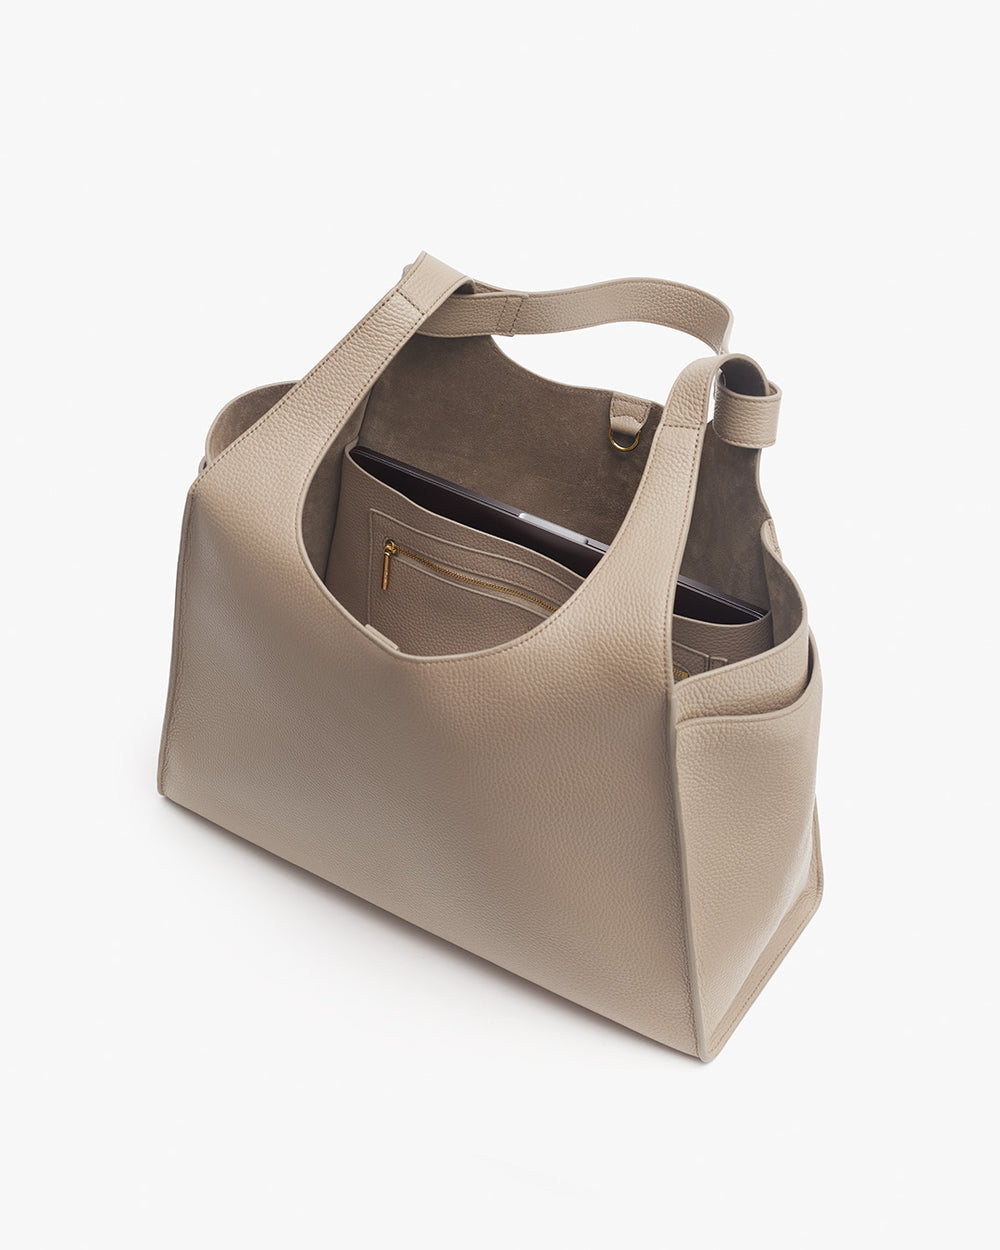 Open handbag with top handles and a visible inner pocket.